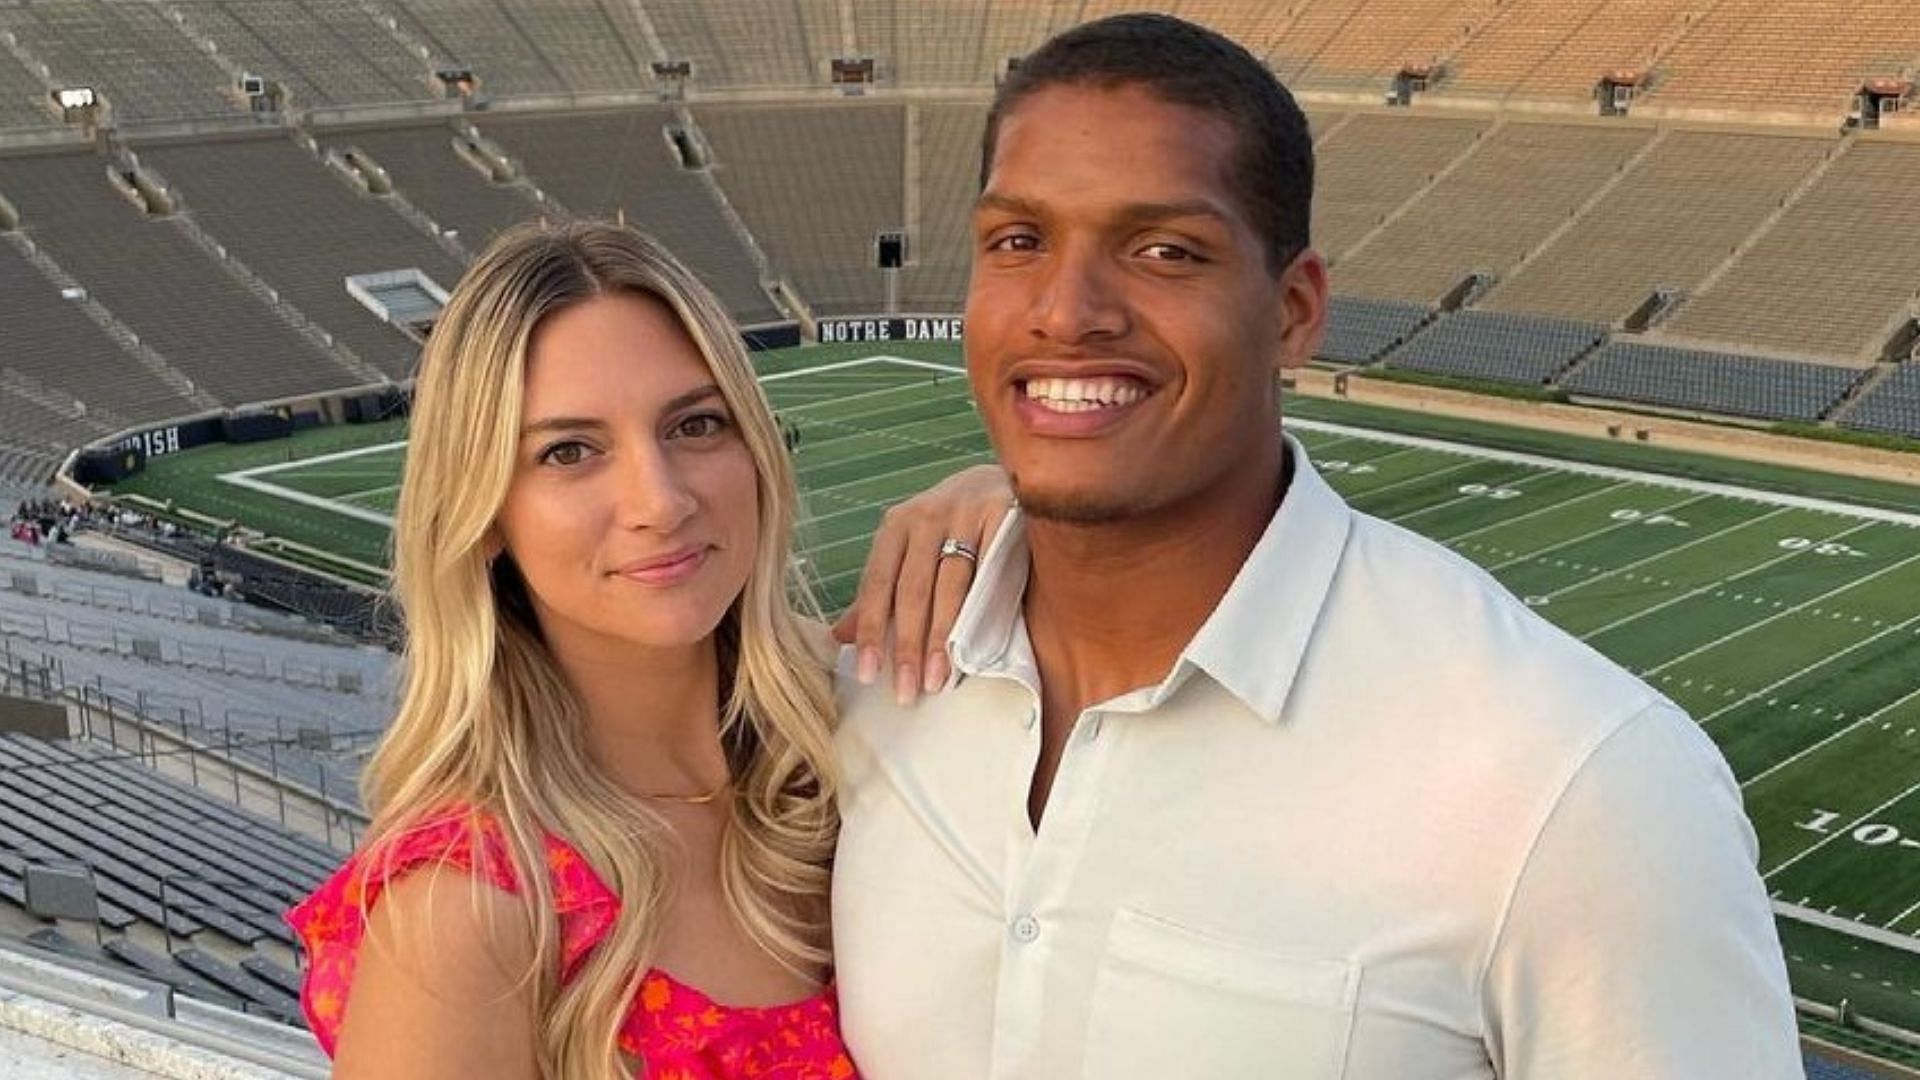 Isaac Rochell and his wife, Allison Kucharczyk or Allison Kuch on TikTok. (Image credit: Instagram.com/isaacrochell